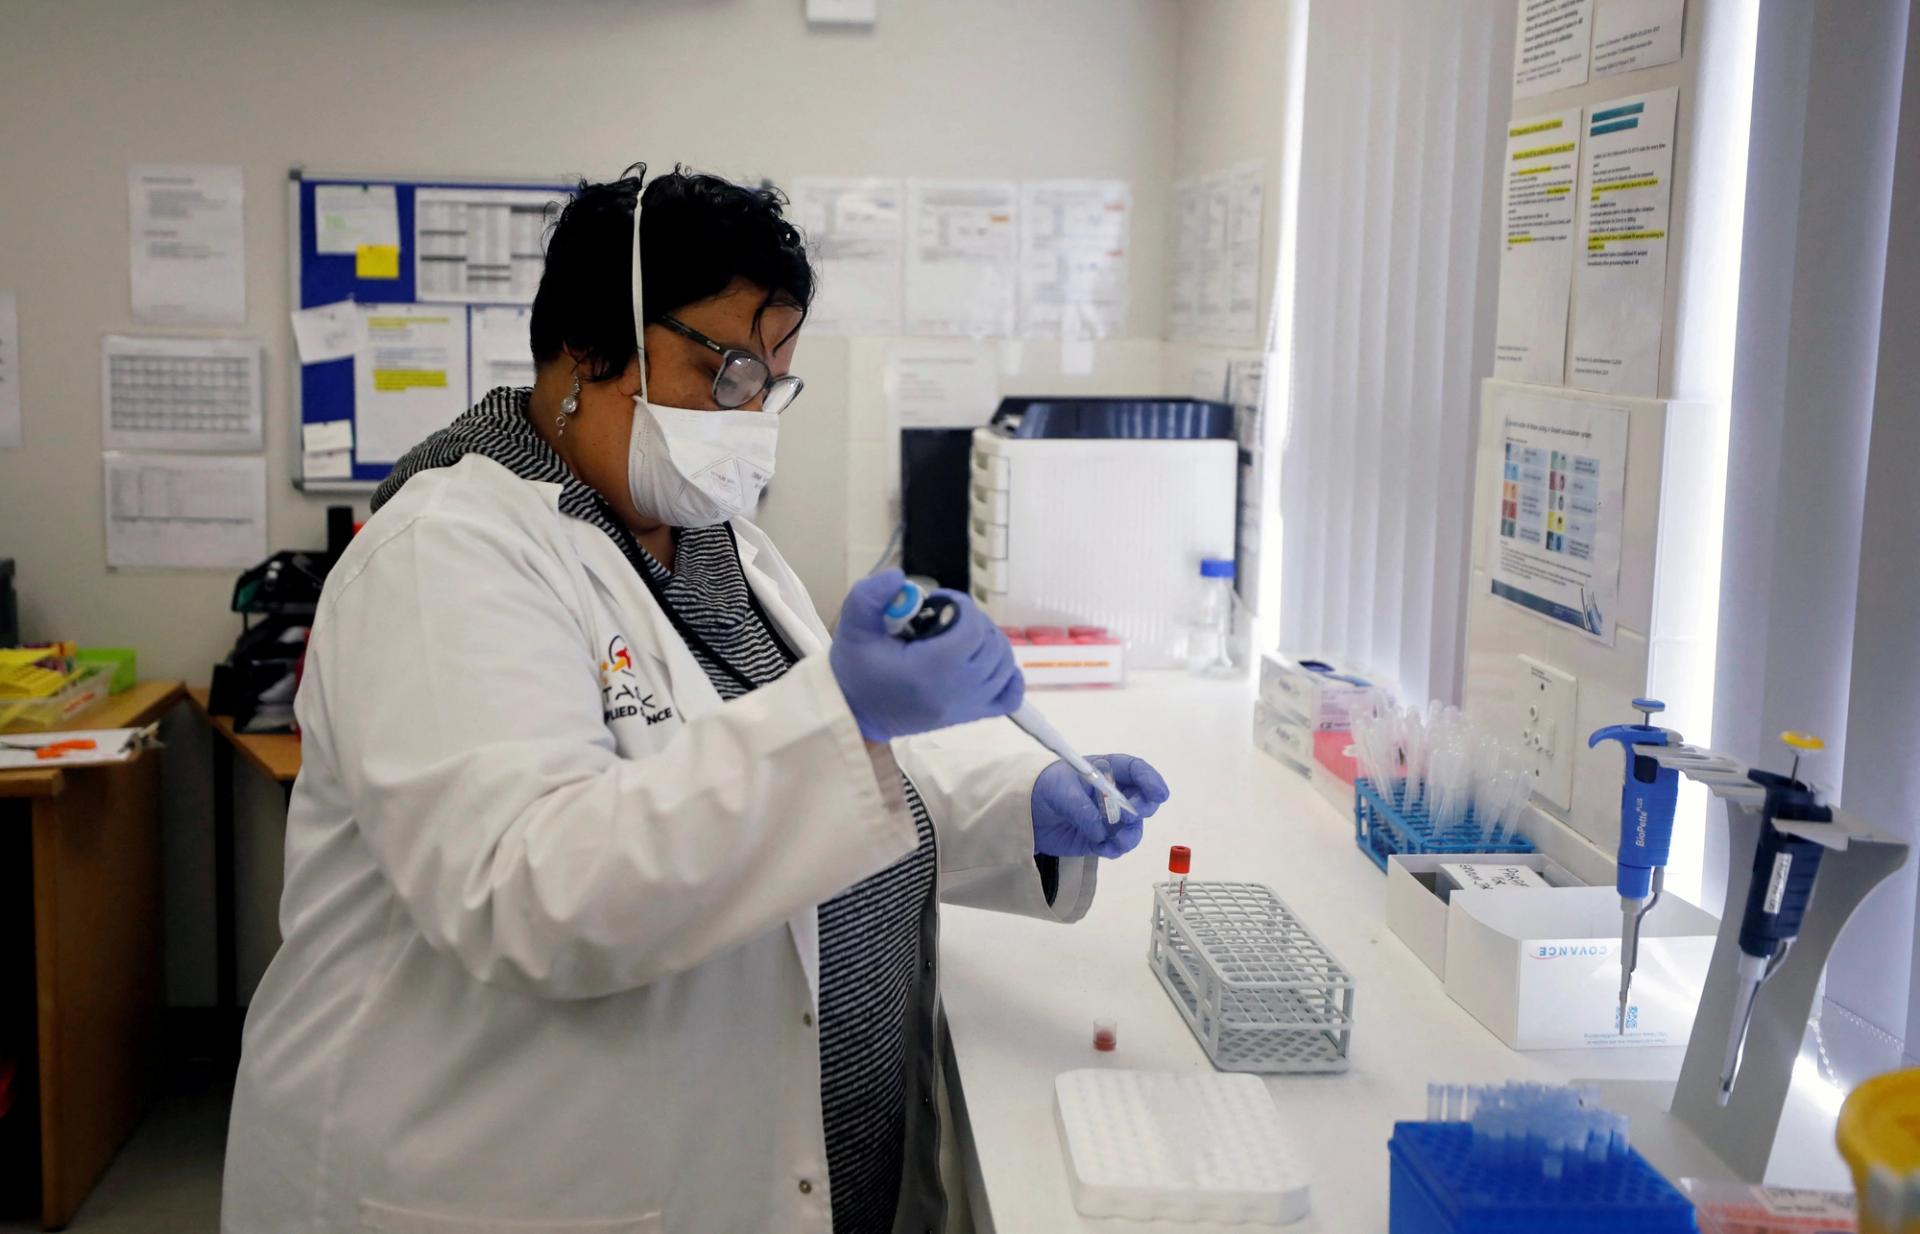 A medical researcher studying the BCG vaccine for tuberculosis examines test samples in a laboratory run by South African biotech company TASK in Cape Town, South Africa, May 11, 2020. Picture taken May 11, 2020. REUTERS/Mike Hutchings